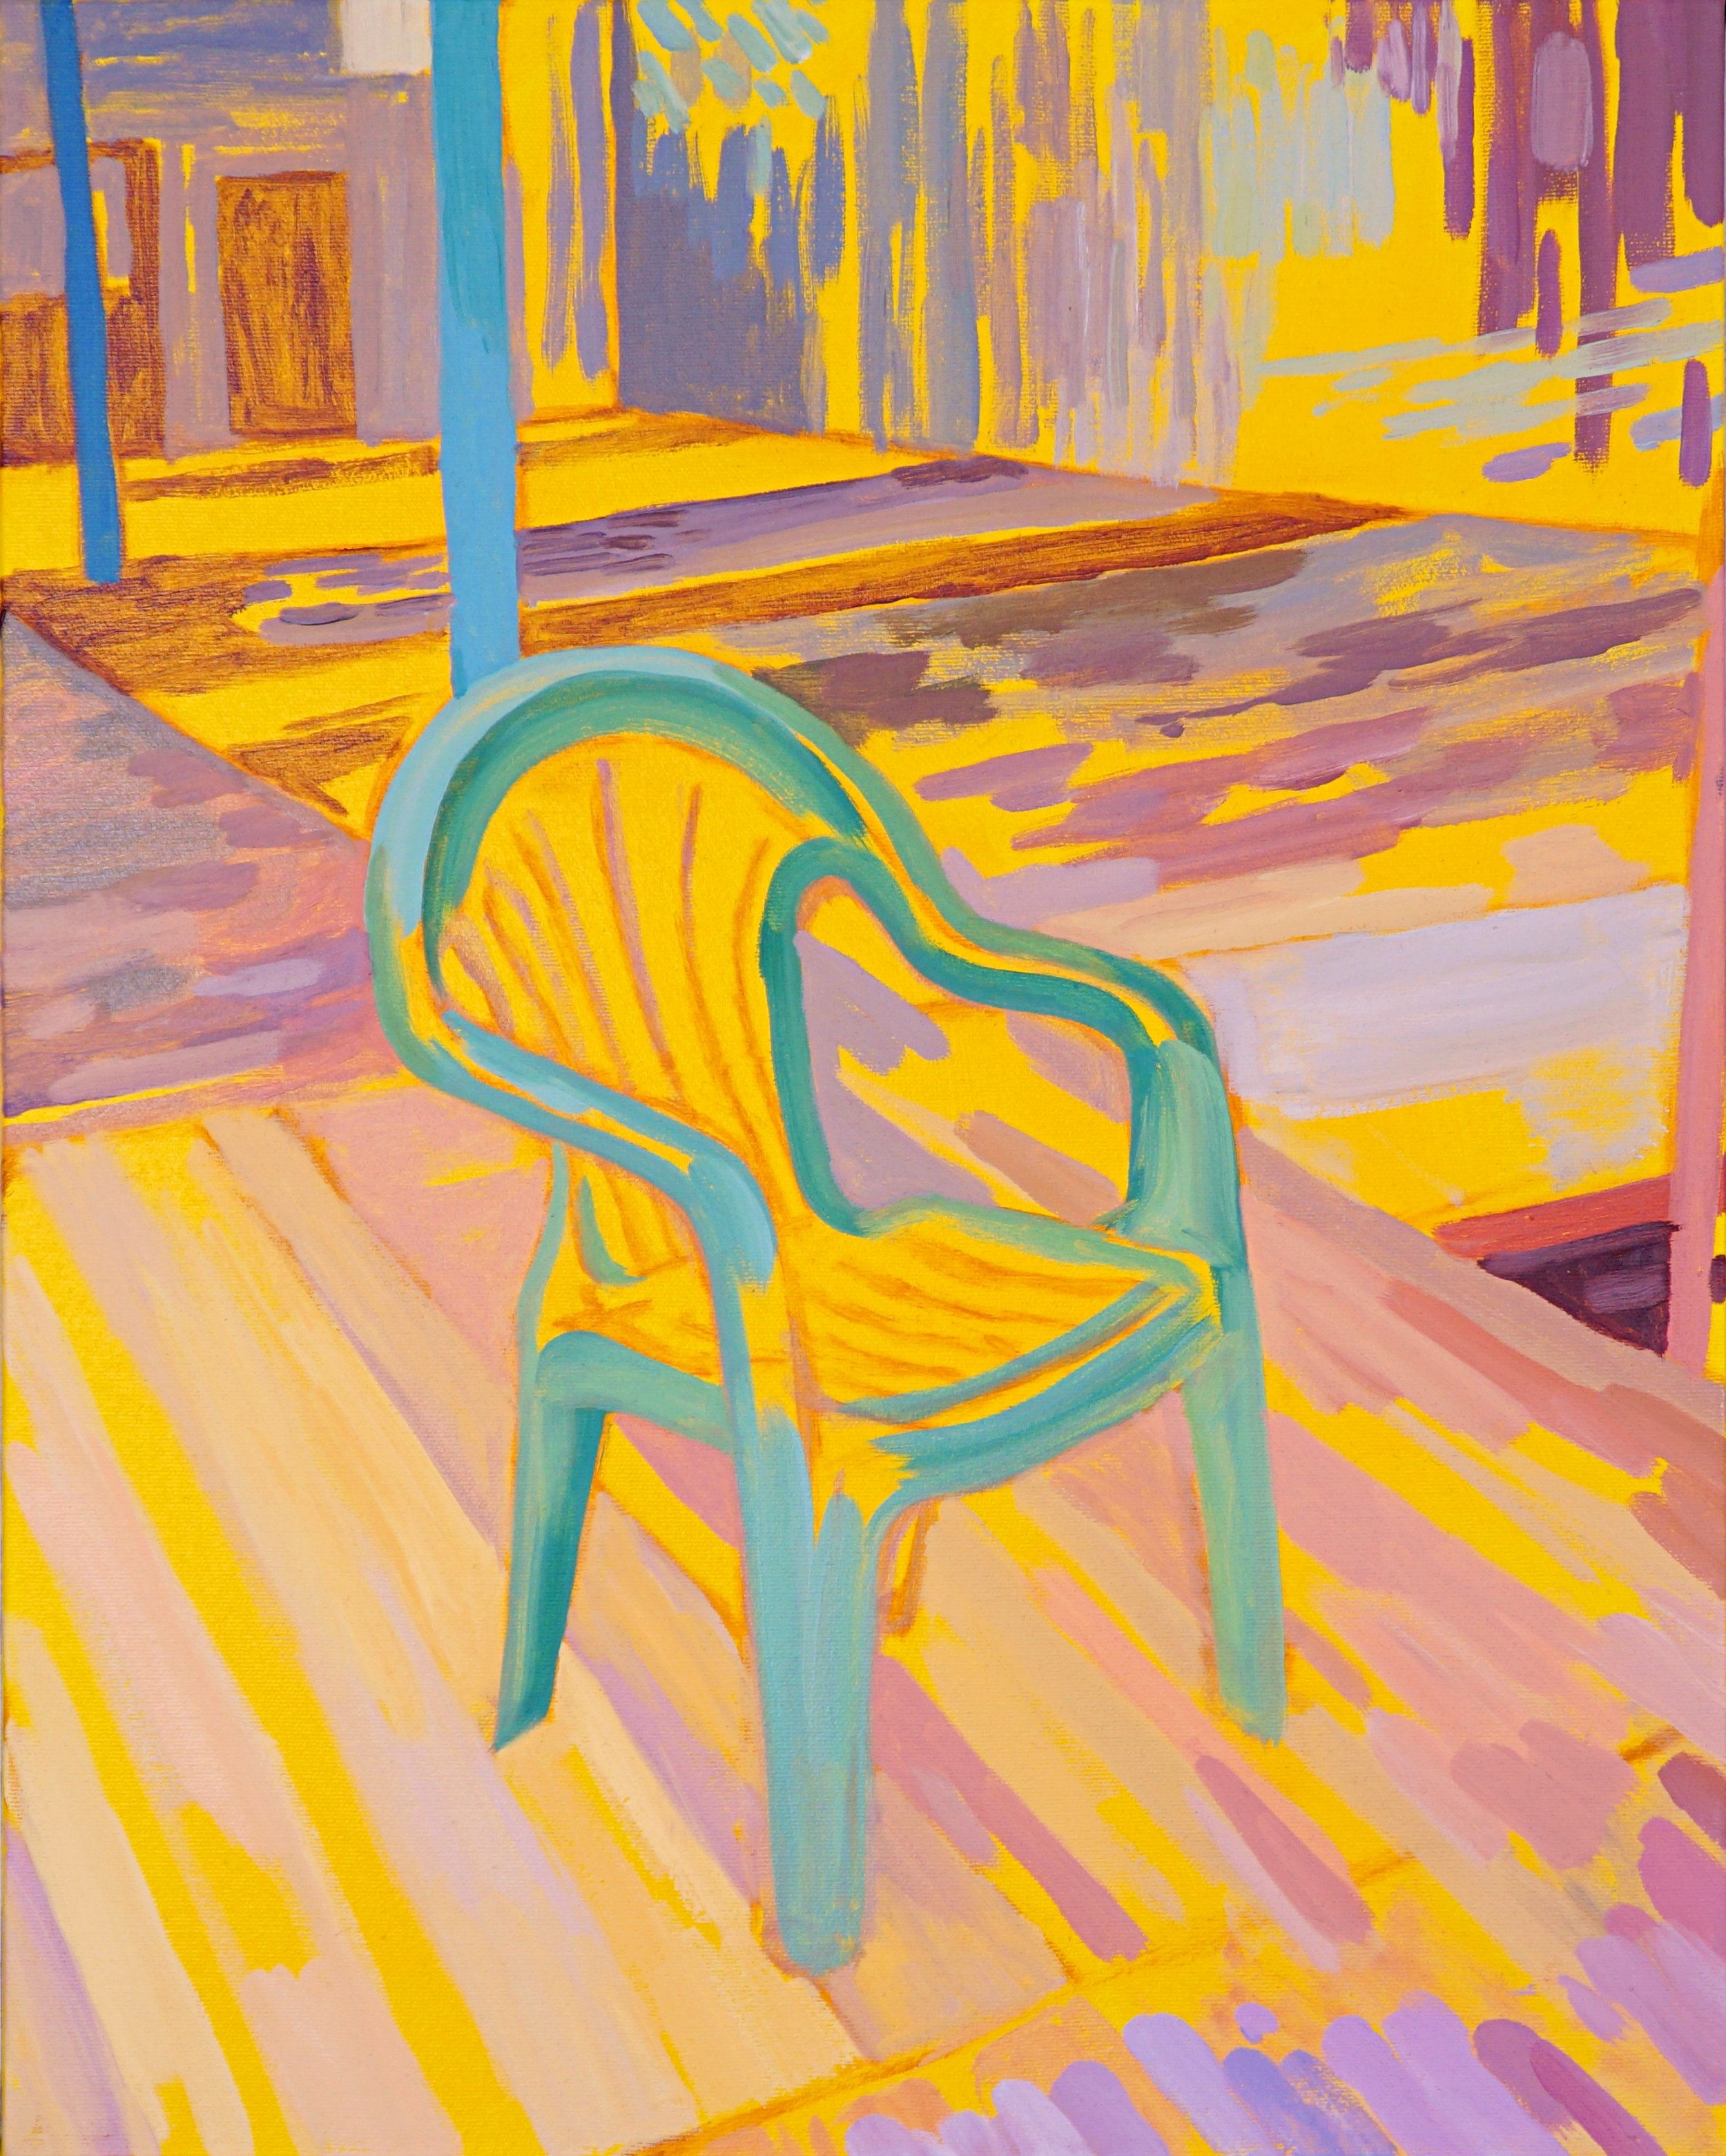  A Chair, Alone (2019)  12”x16”x1.5”  oil on canvas  